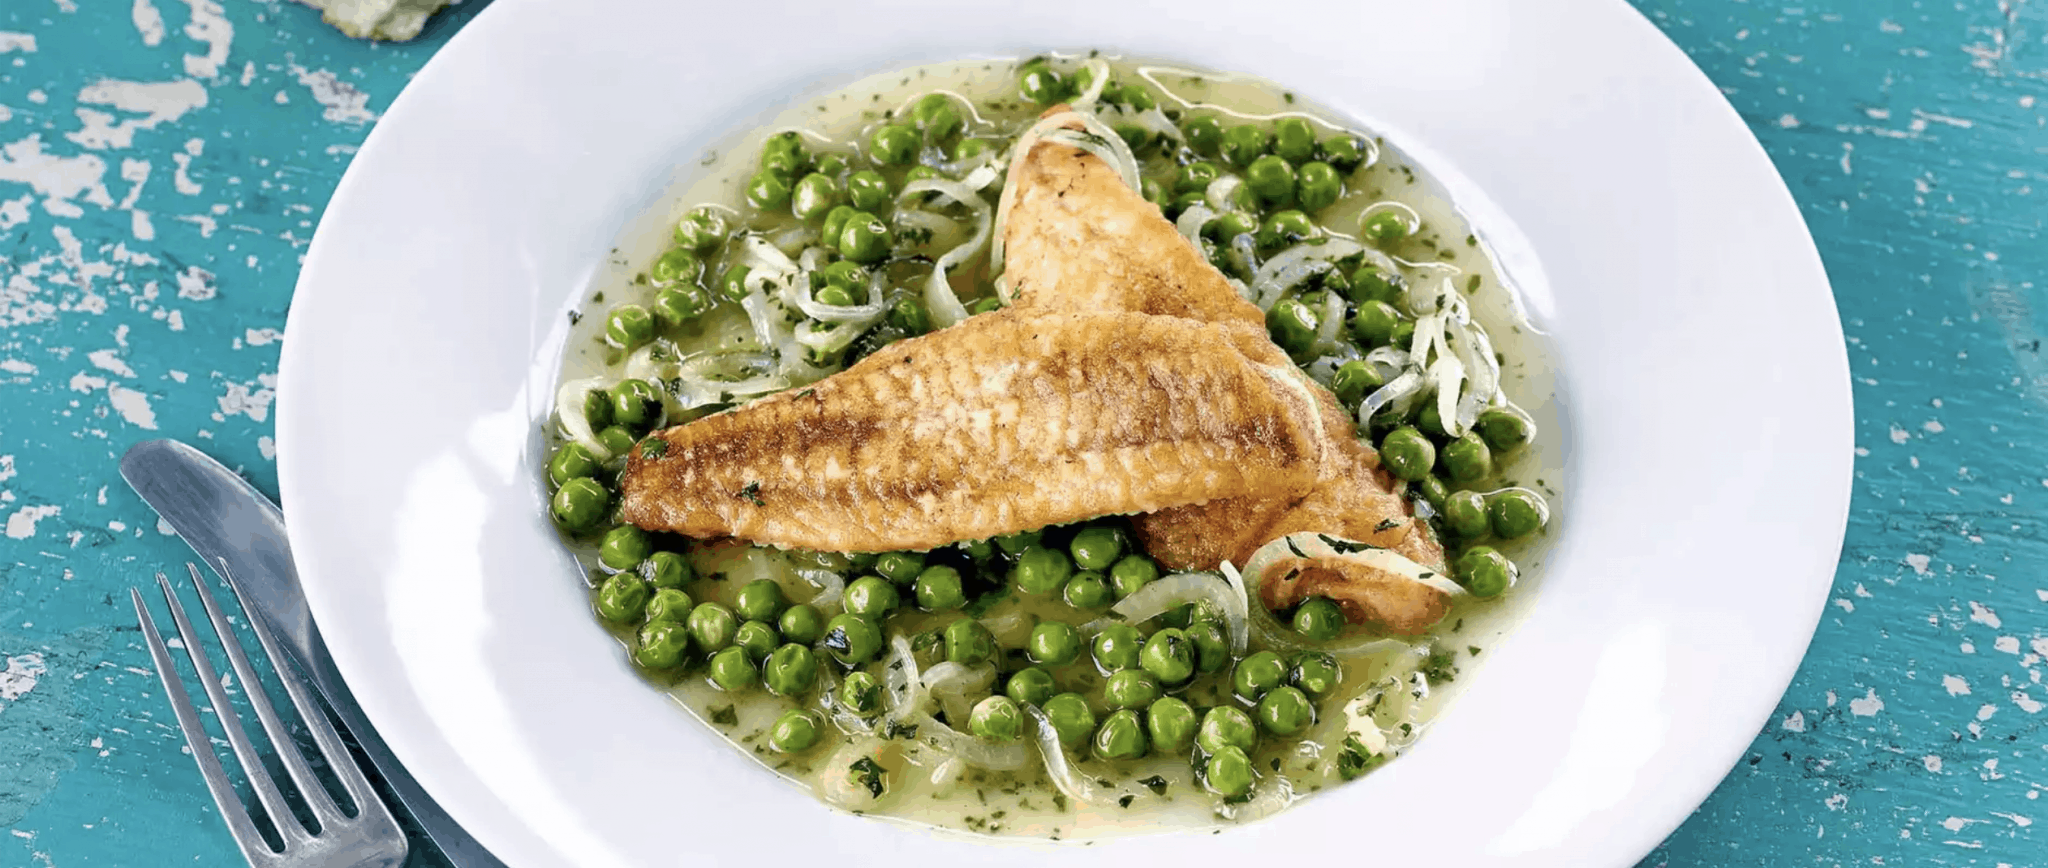 Gurnard Fish Fillet with Peas and Cider Image